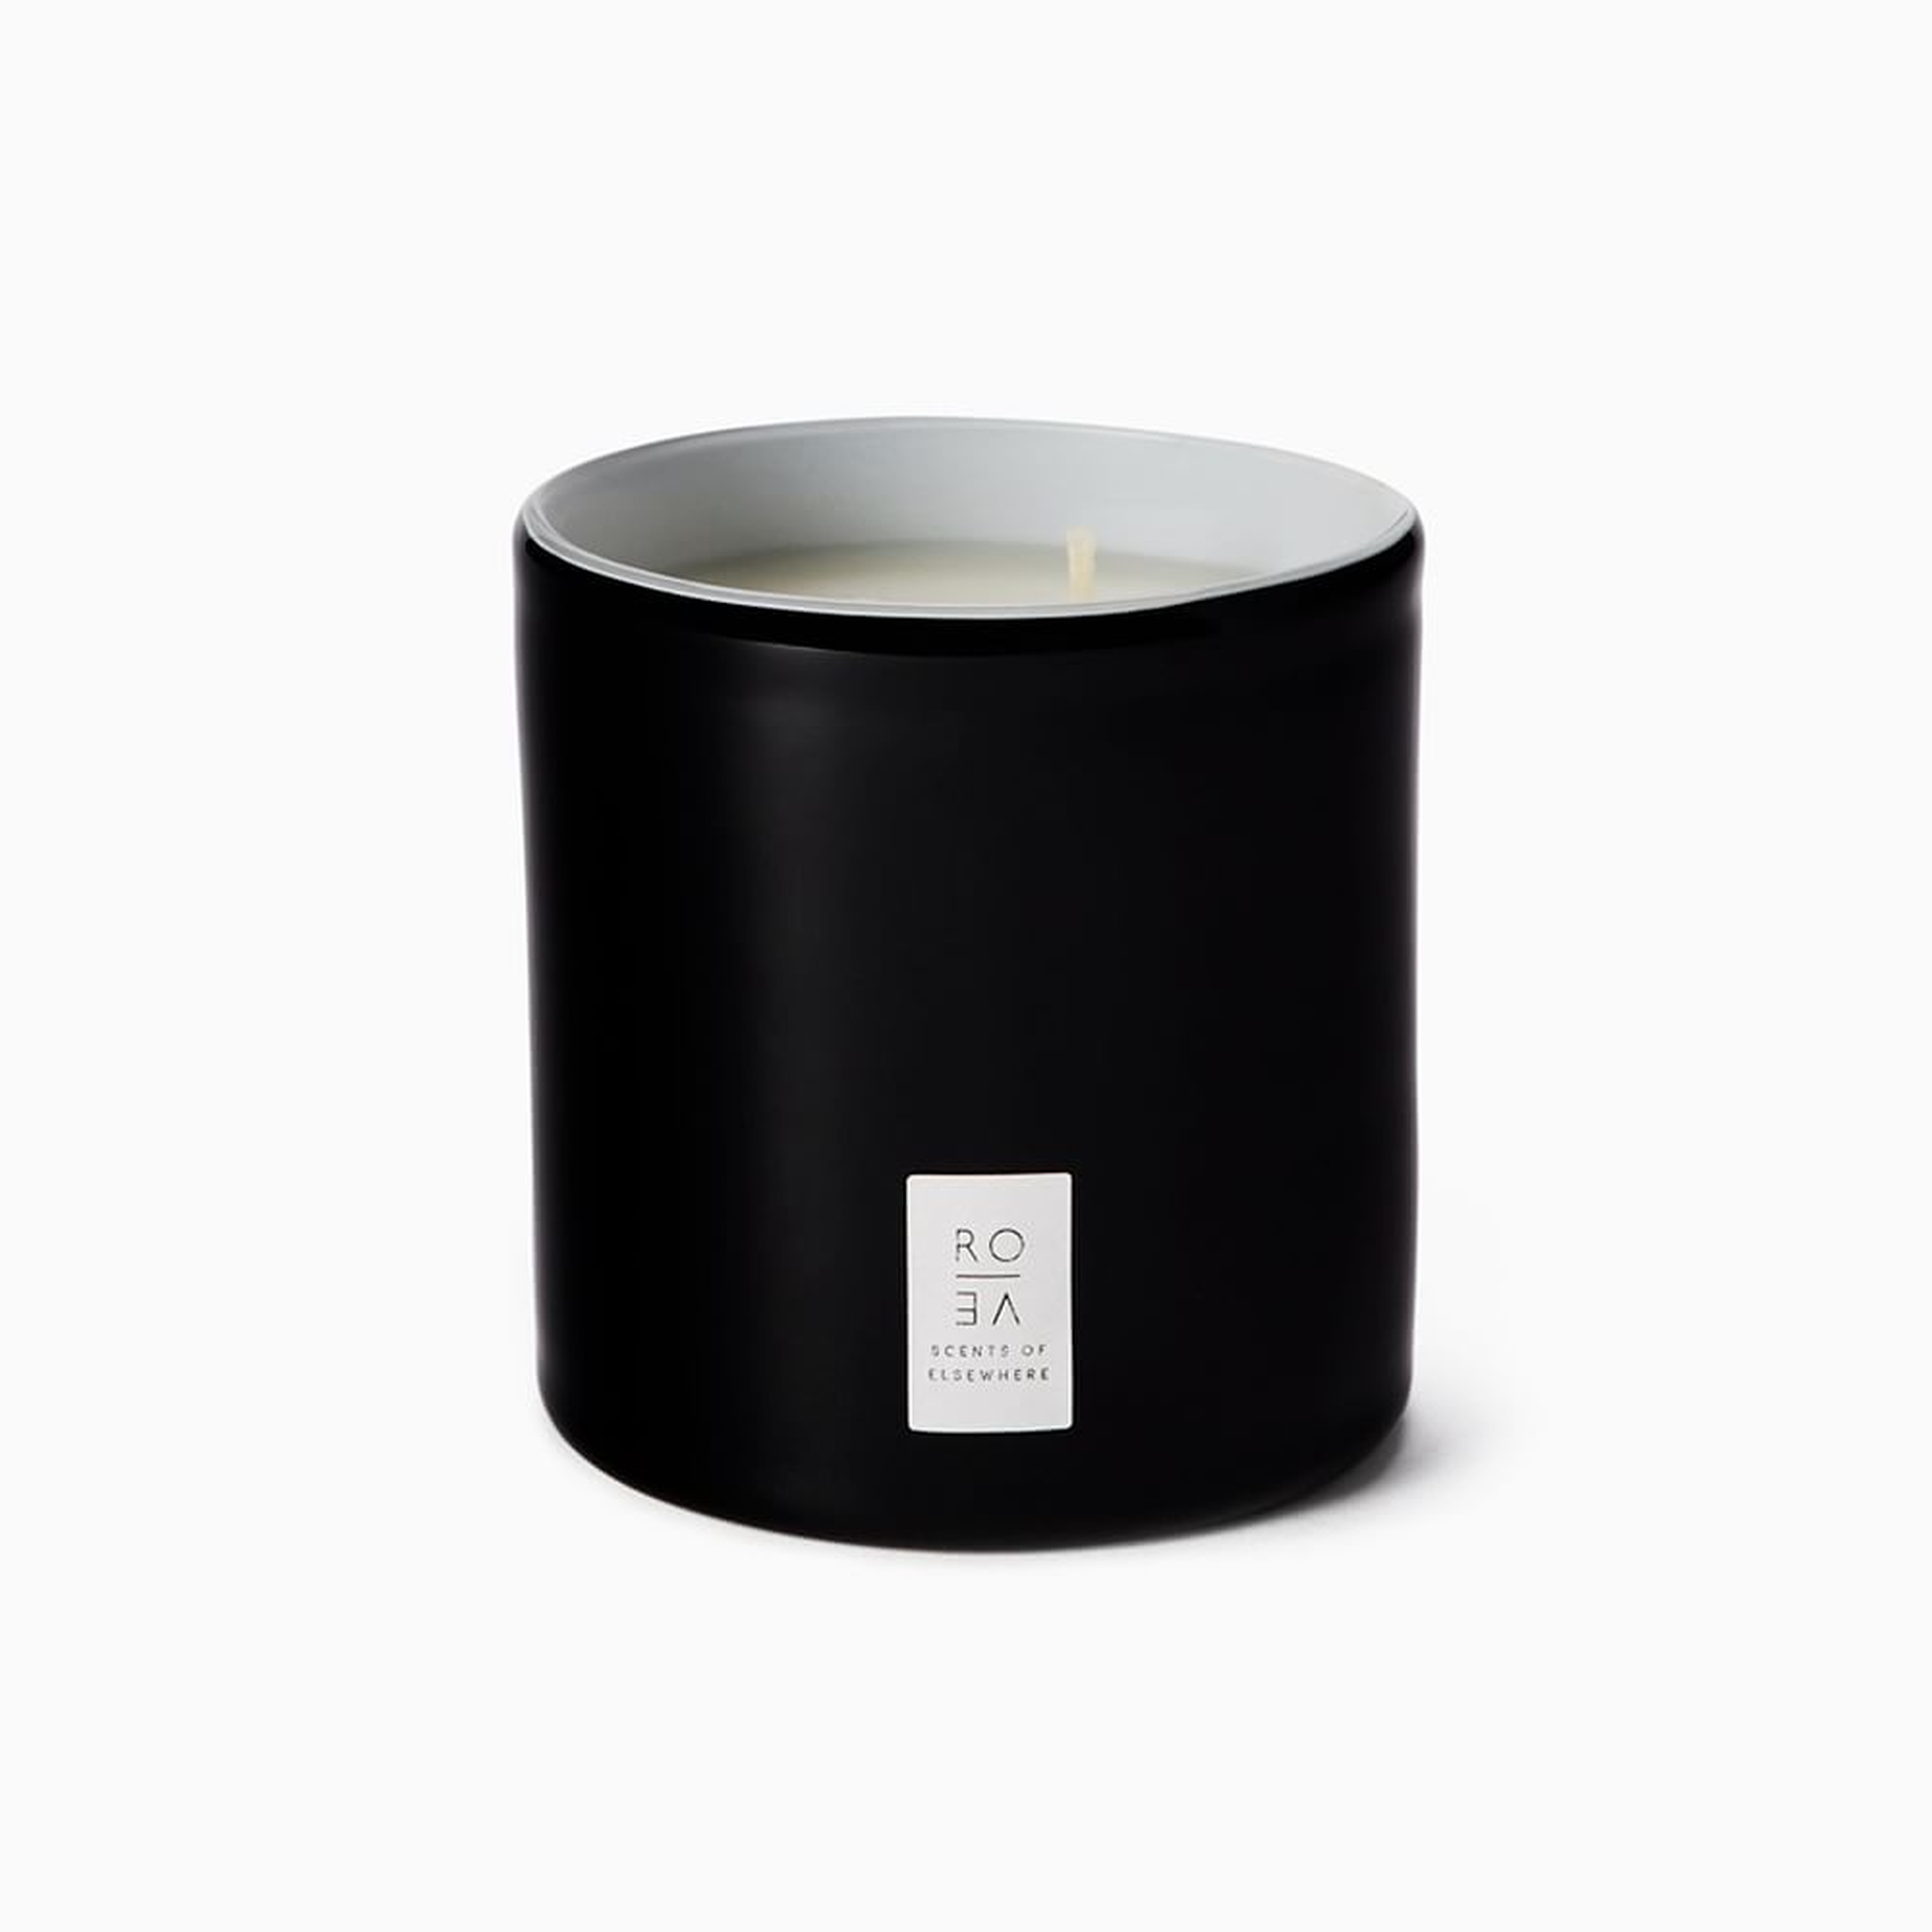 Boxed Candles, Promenade, Set of 2 - West Elm